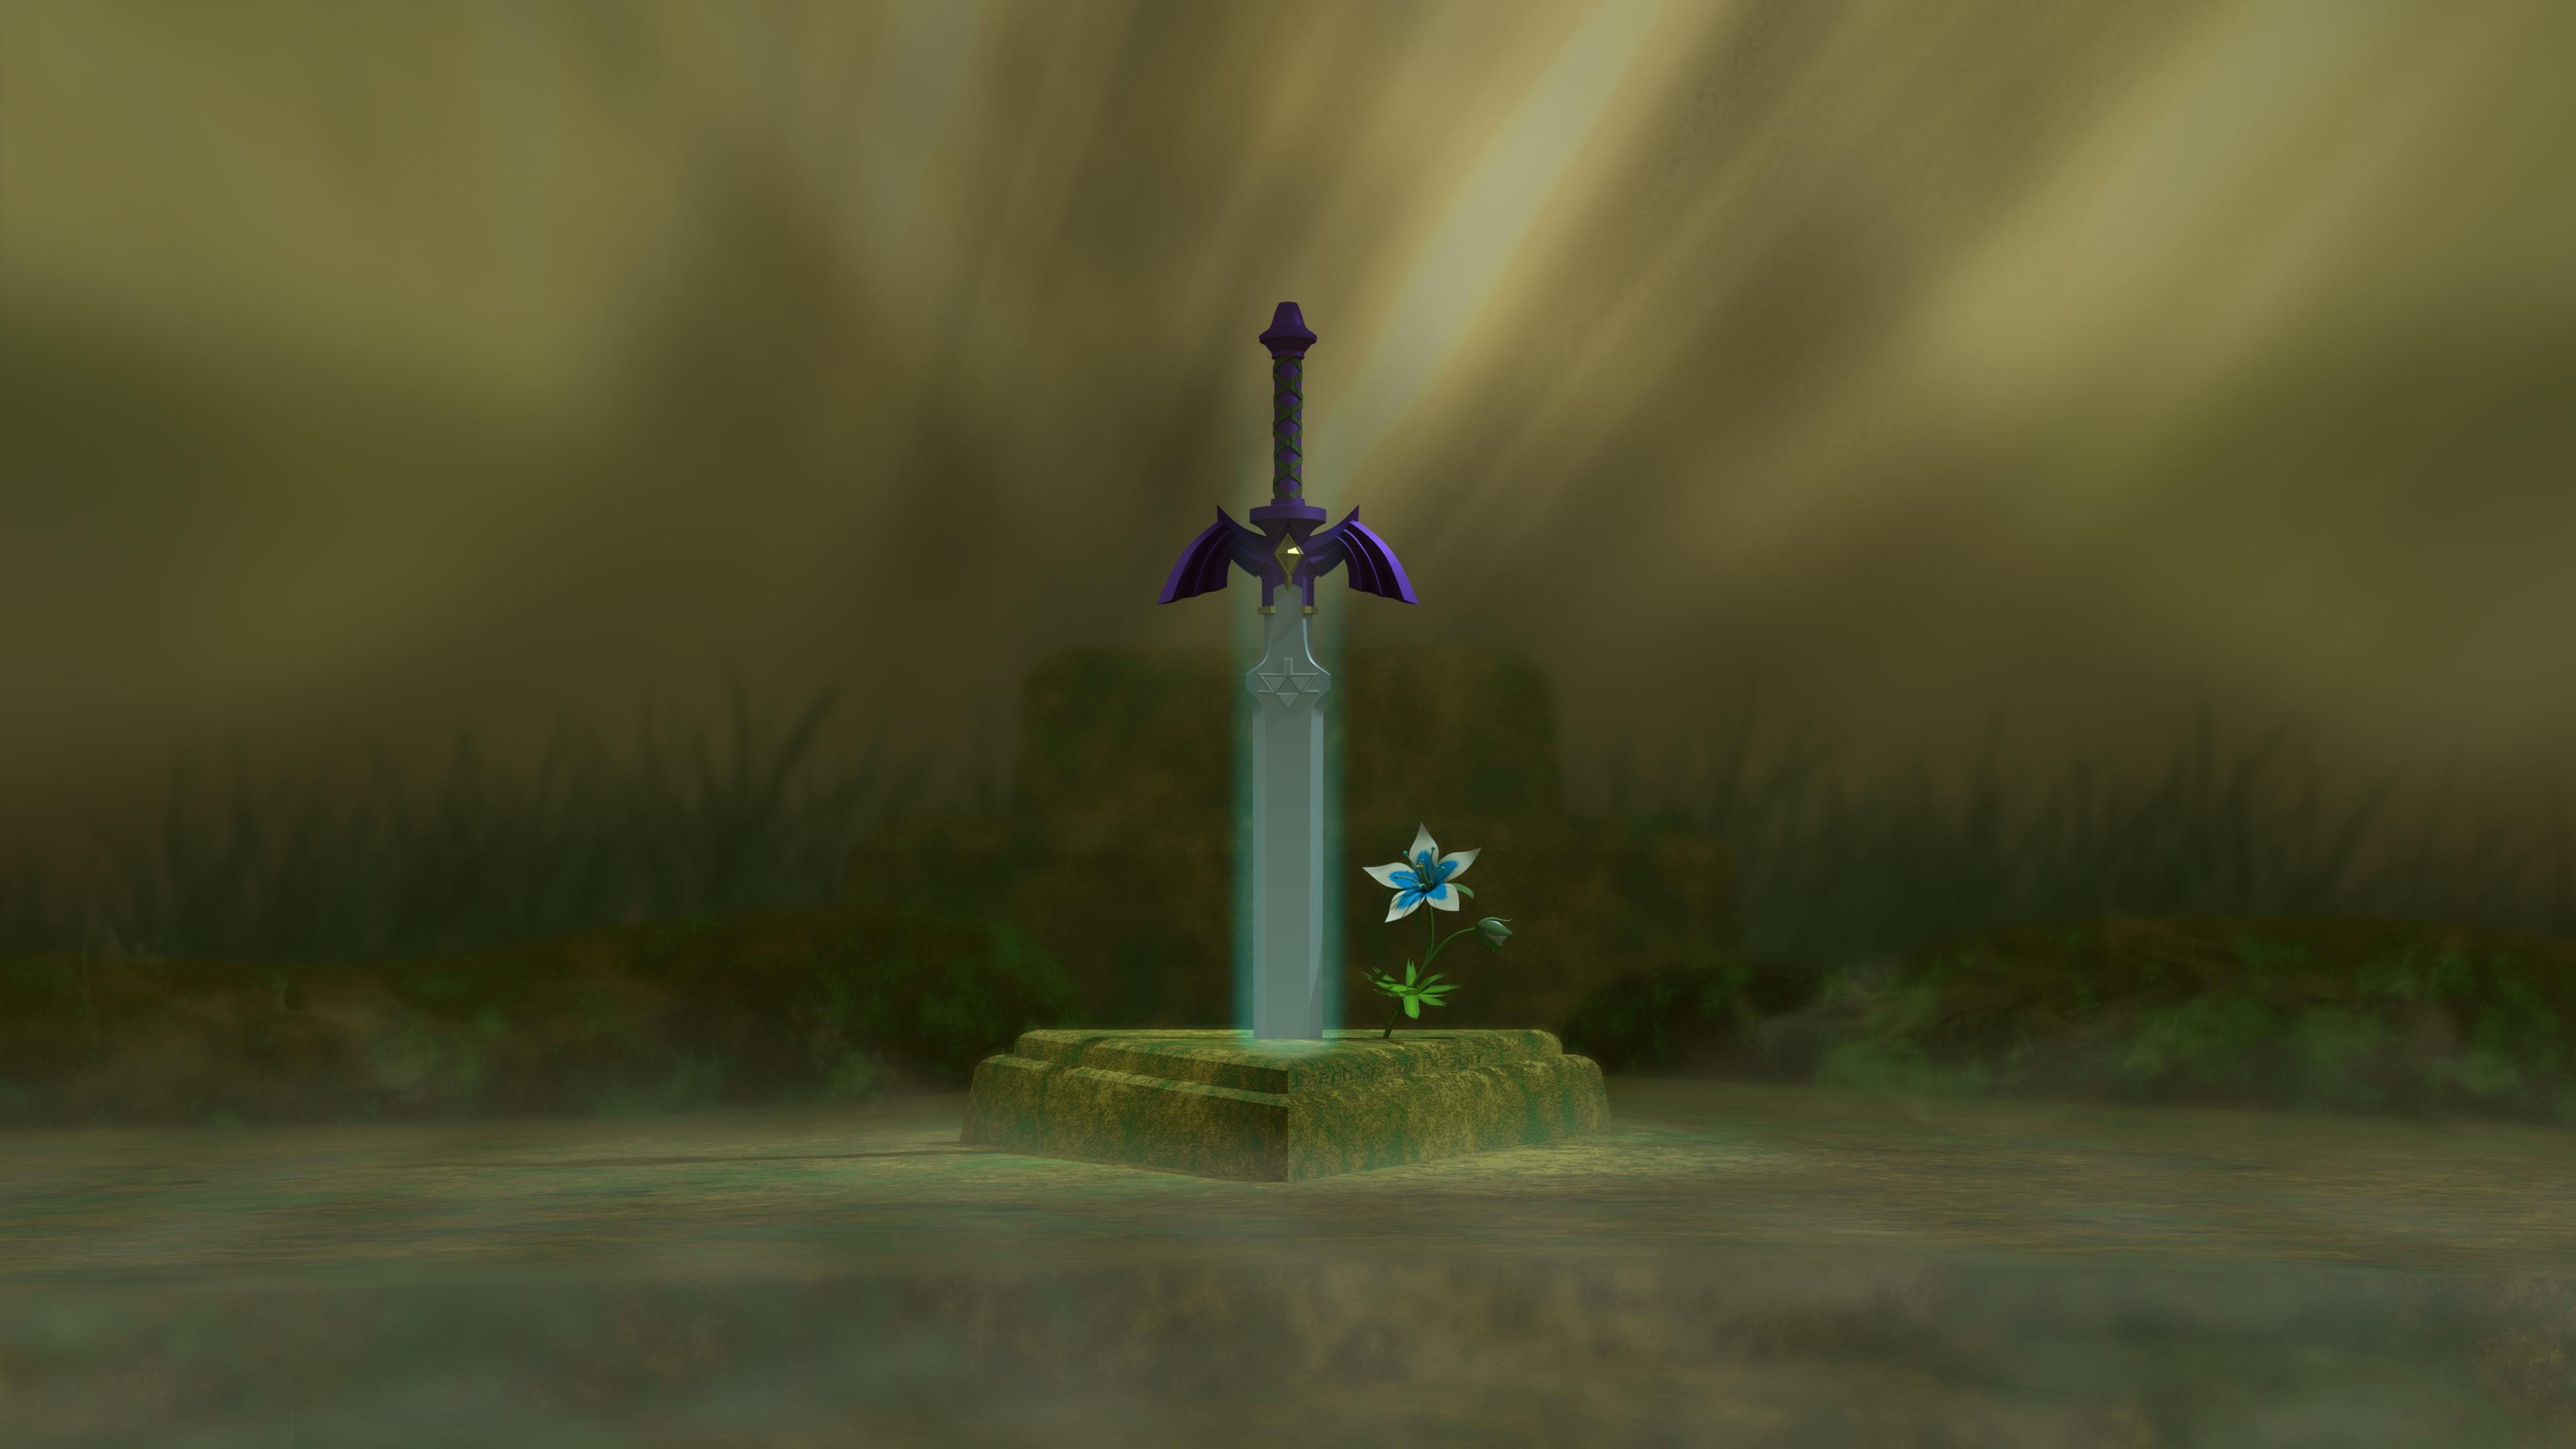 3840x2160 I made a Master Sword wallpaper (4k) in Blender and Photoshop. Hope you all  enjoy!